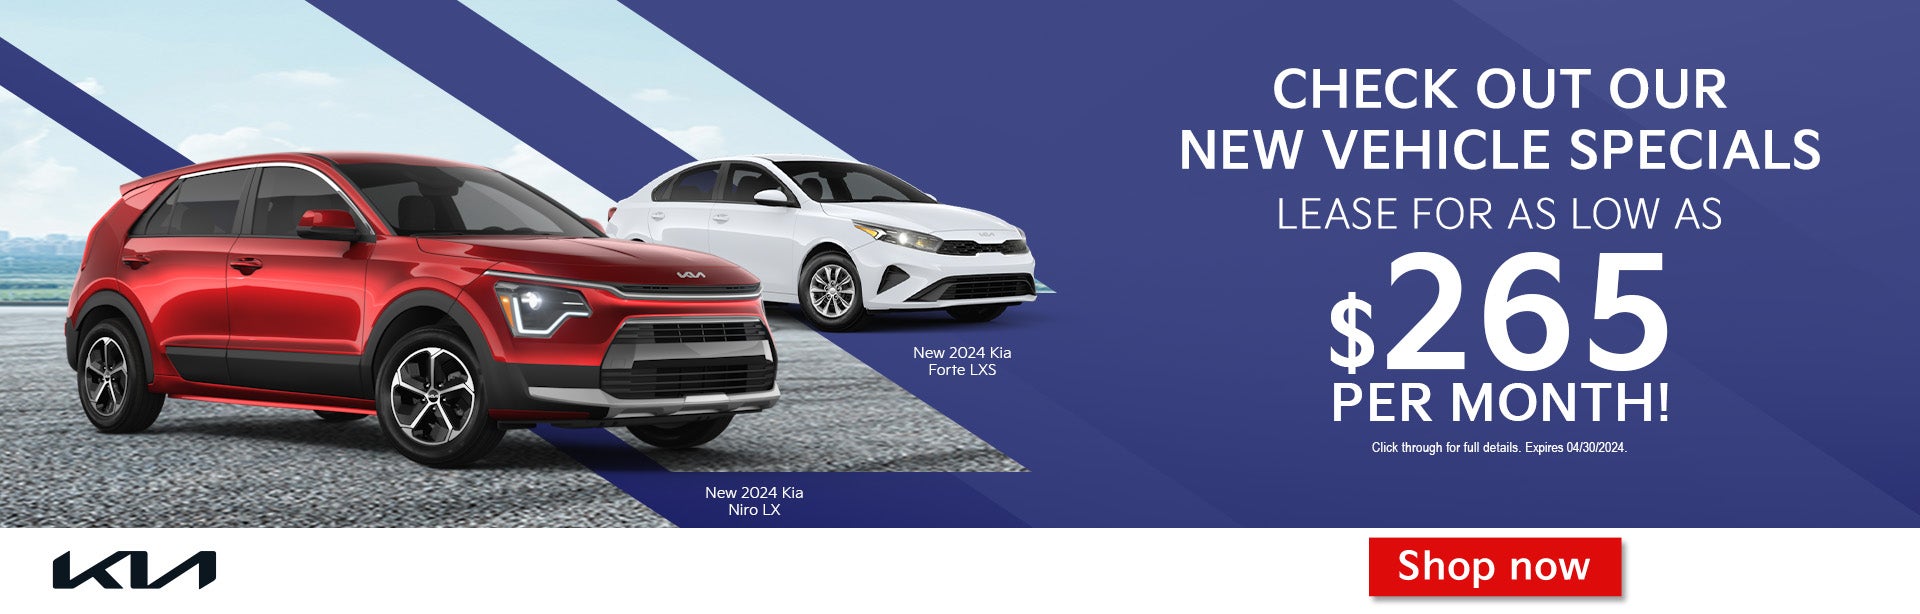 check out our new vehicle specials